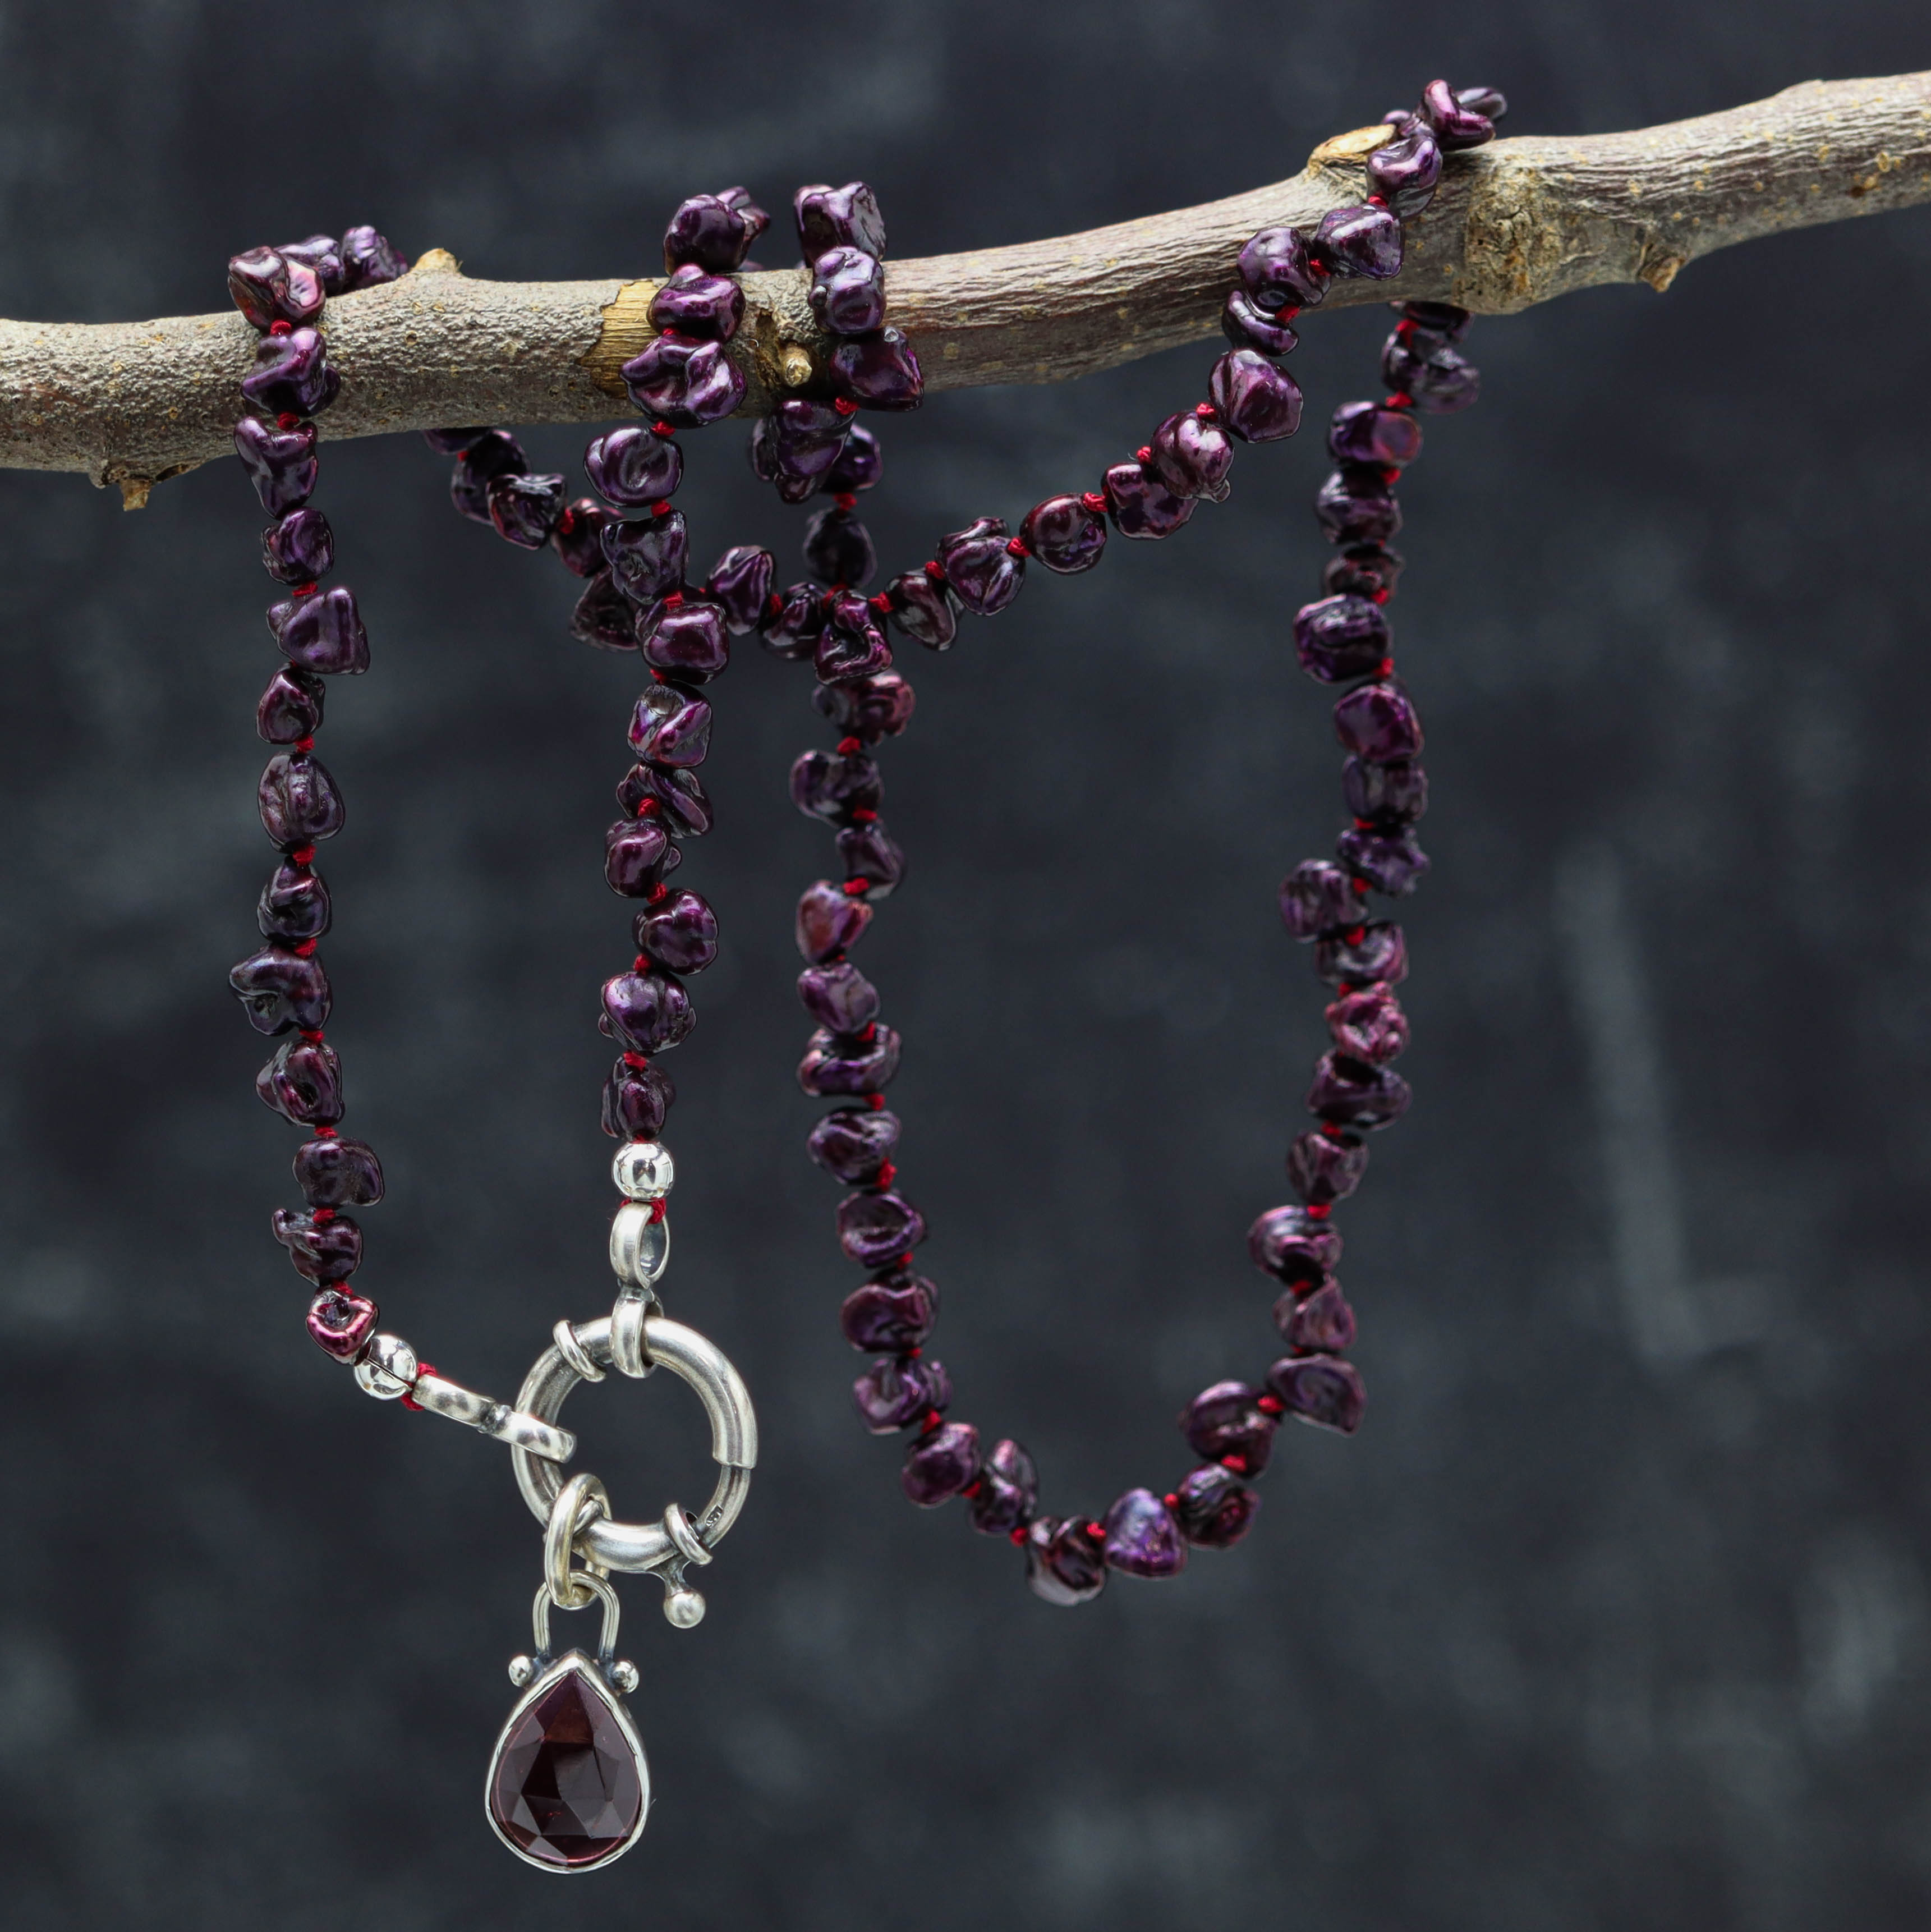 Burgundy Freshwater Pearl and Garnet Pendant Hand Knotted Bead Necklace Sterling Silver